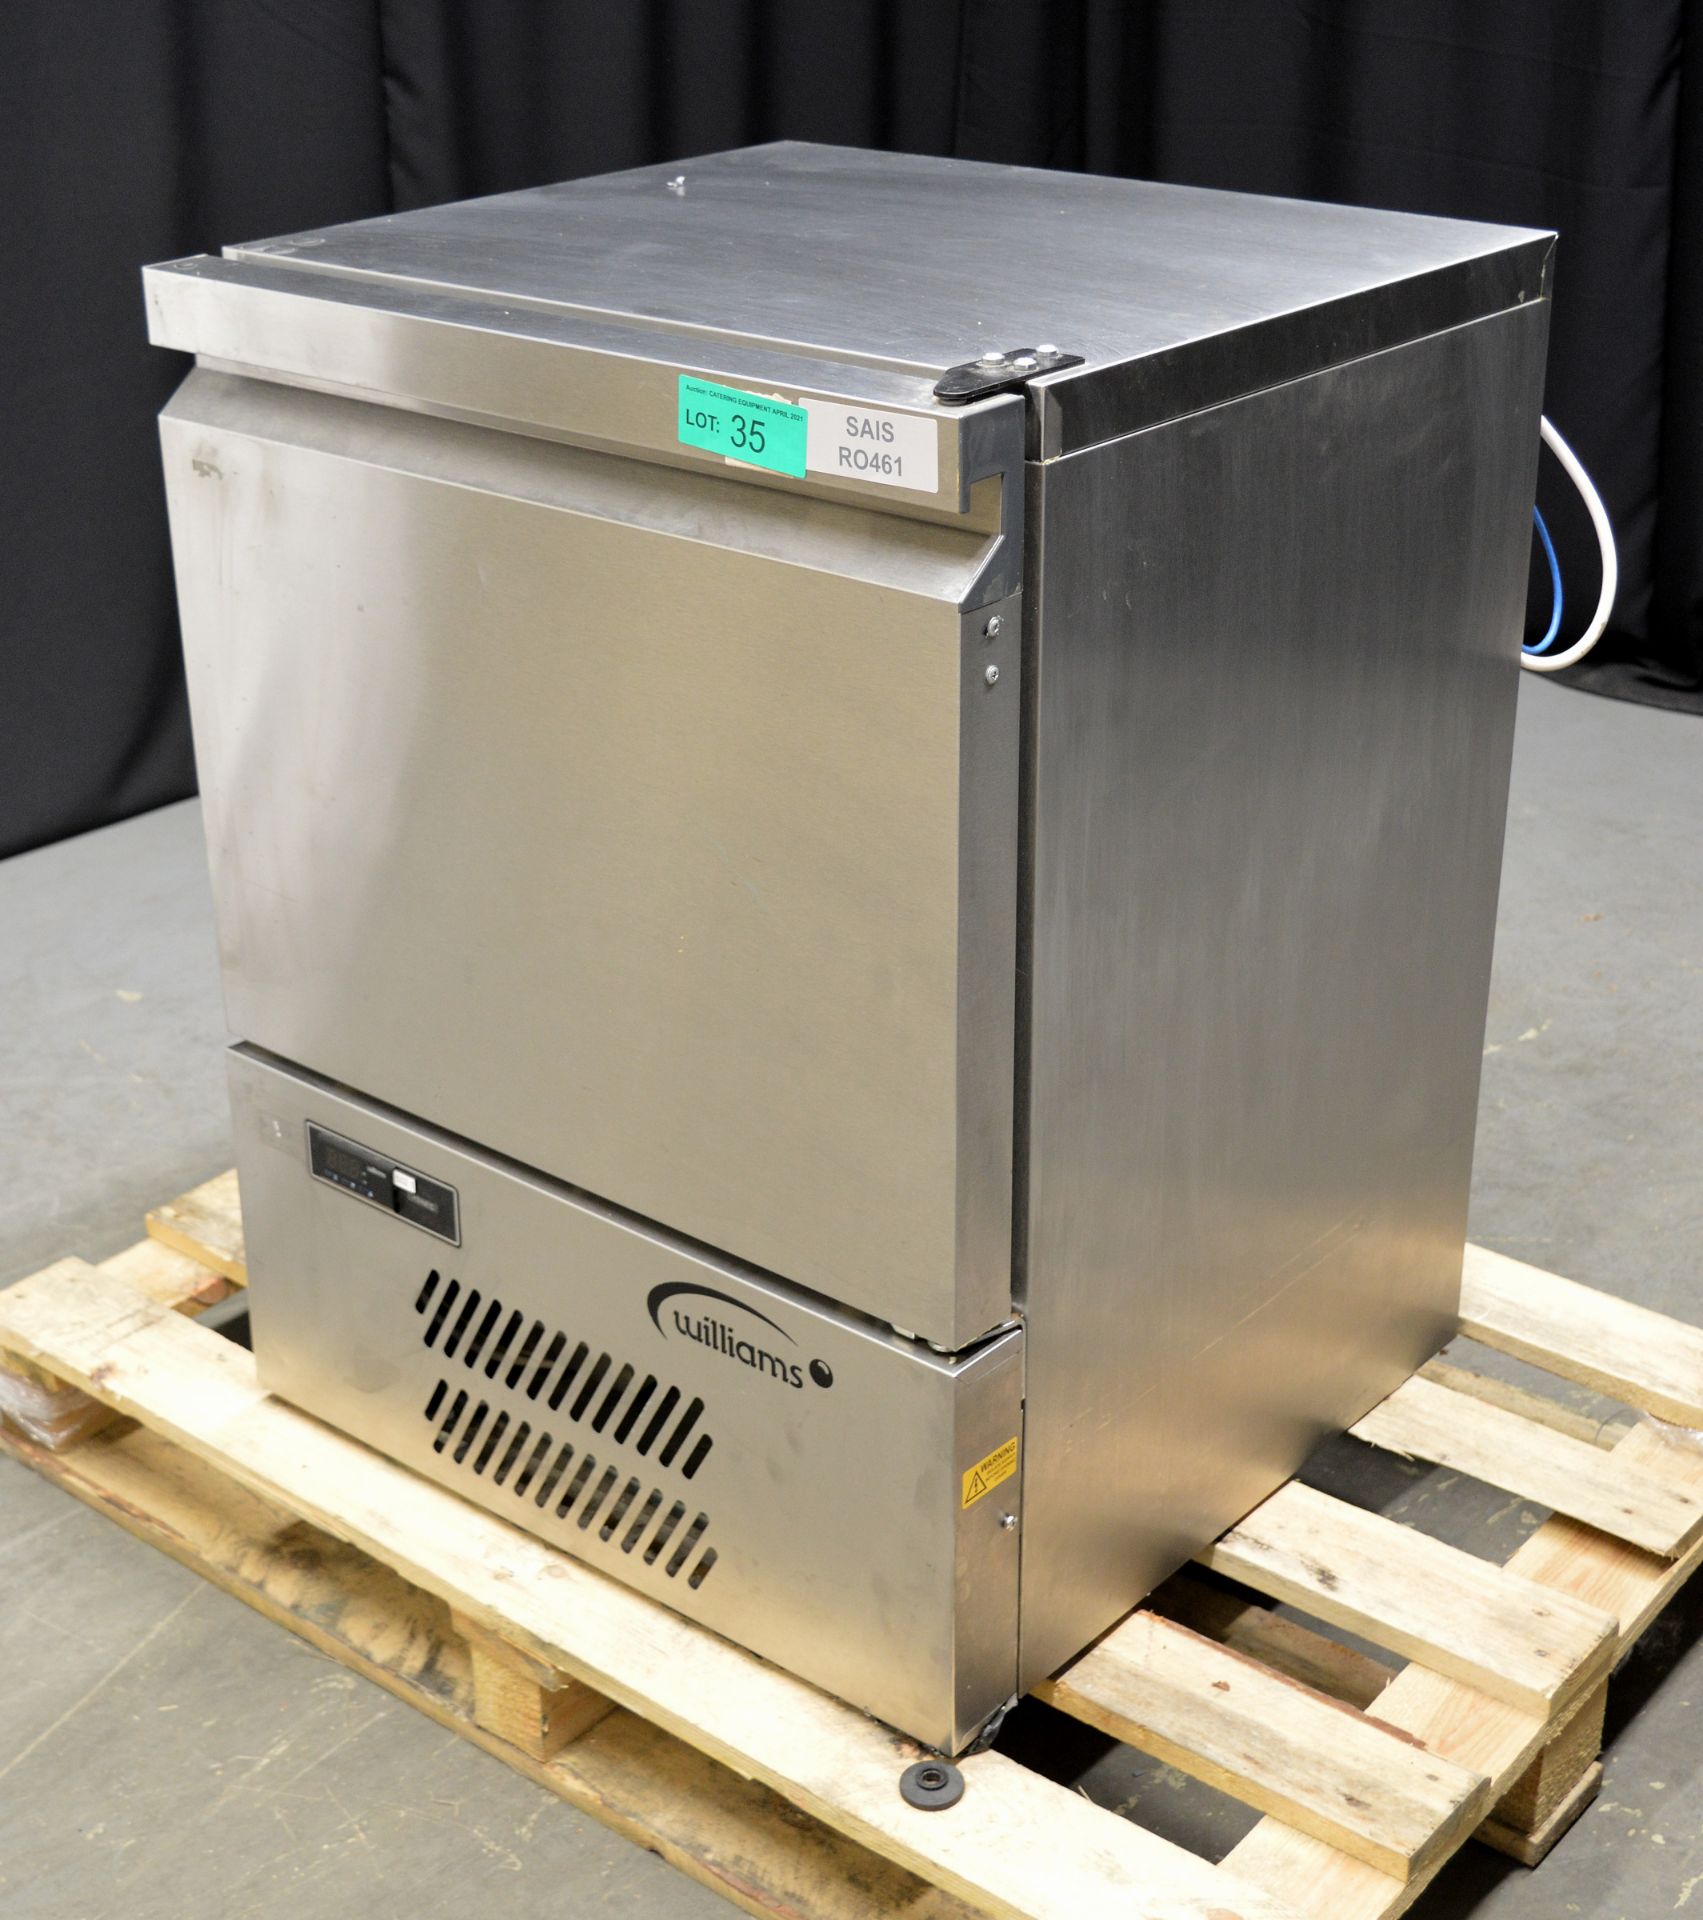 Williams H5UC R290 R1 Stainless Steel Undercounter Fridge, single phase electric - Image 3 of 6